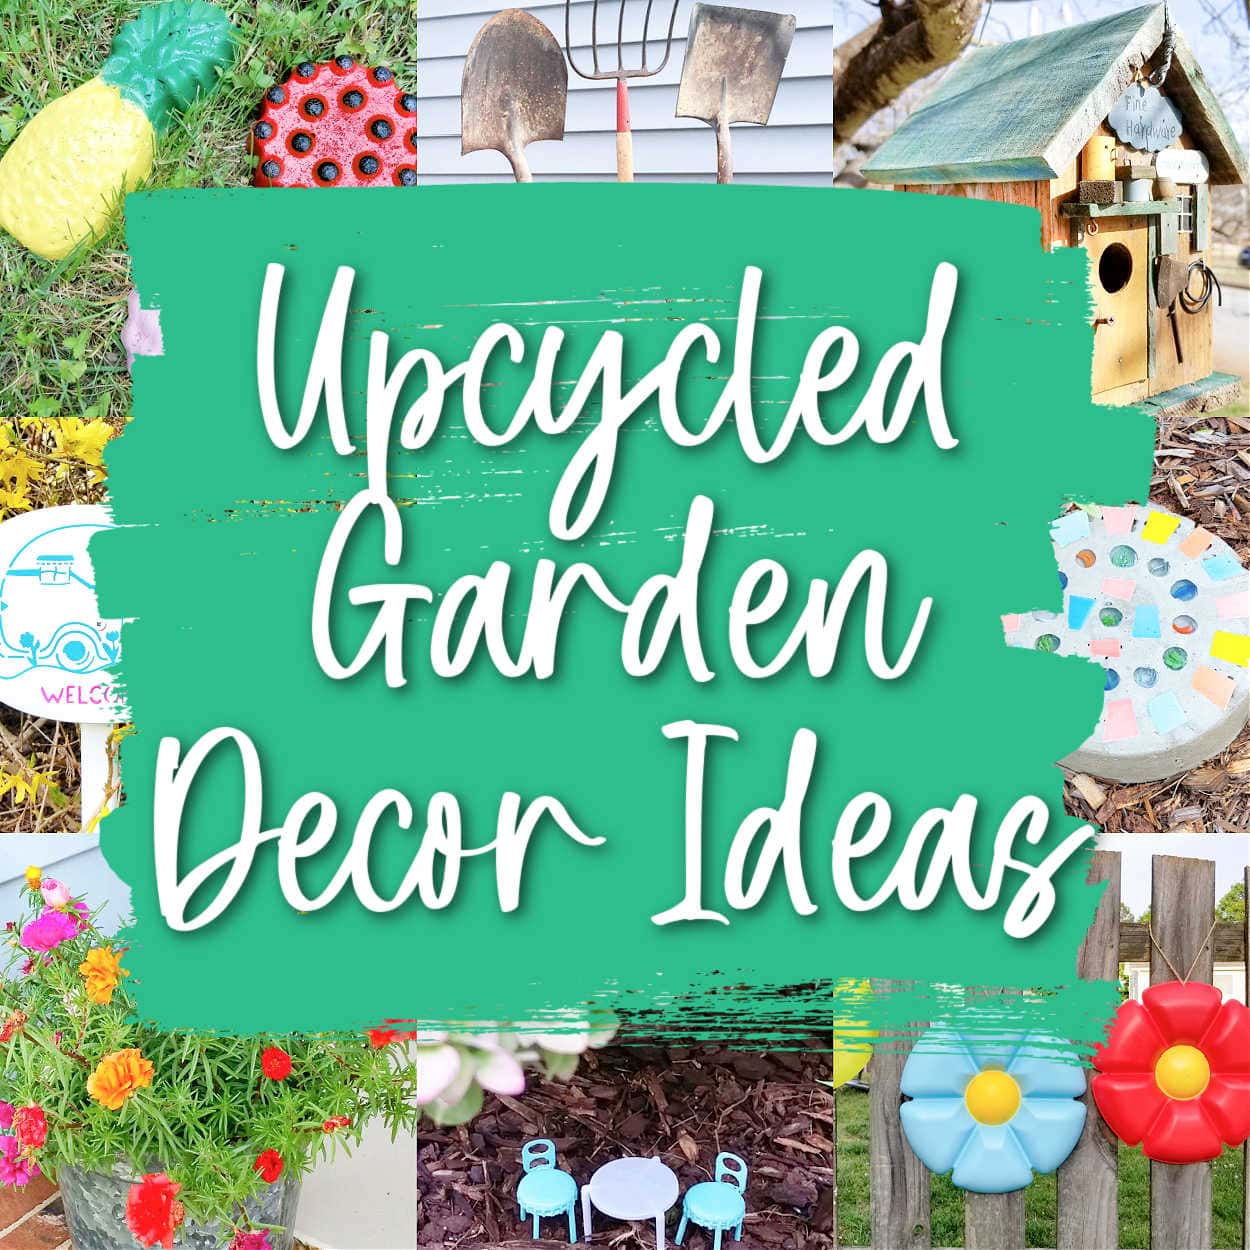 Garden Decor Ideas that are Upcycled and Repurposed